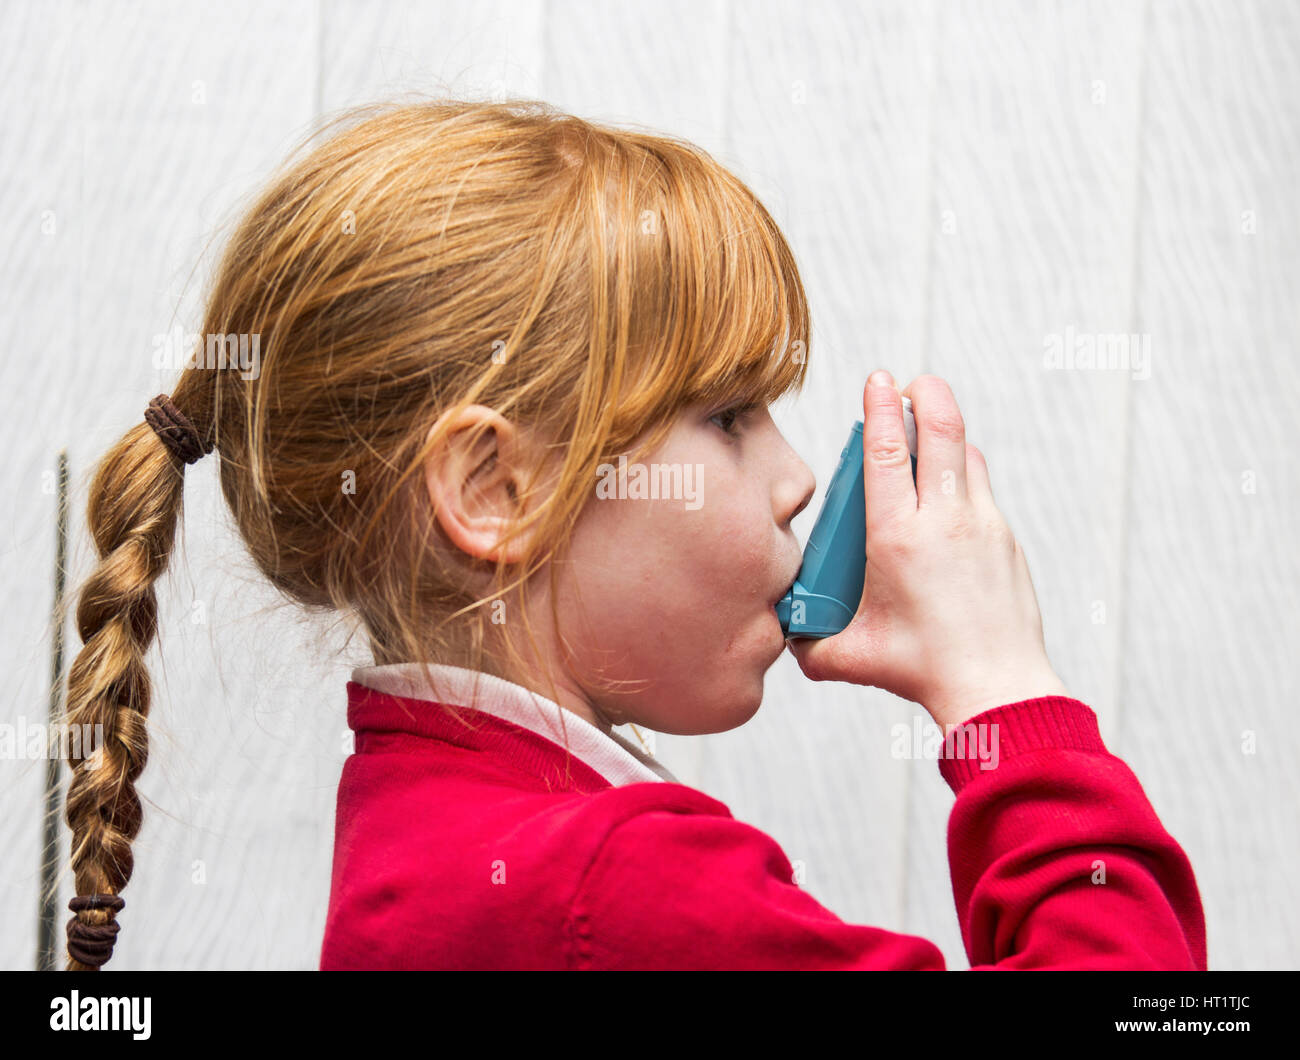 Ventolin asthma inhaler use by 7 year old Caucasian girl Stock Photo